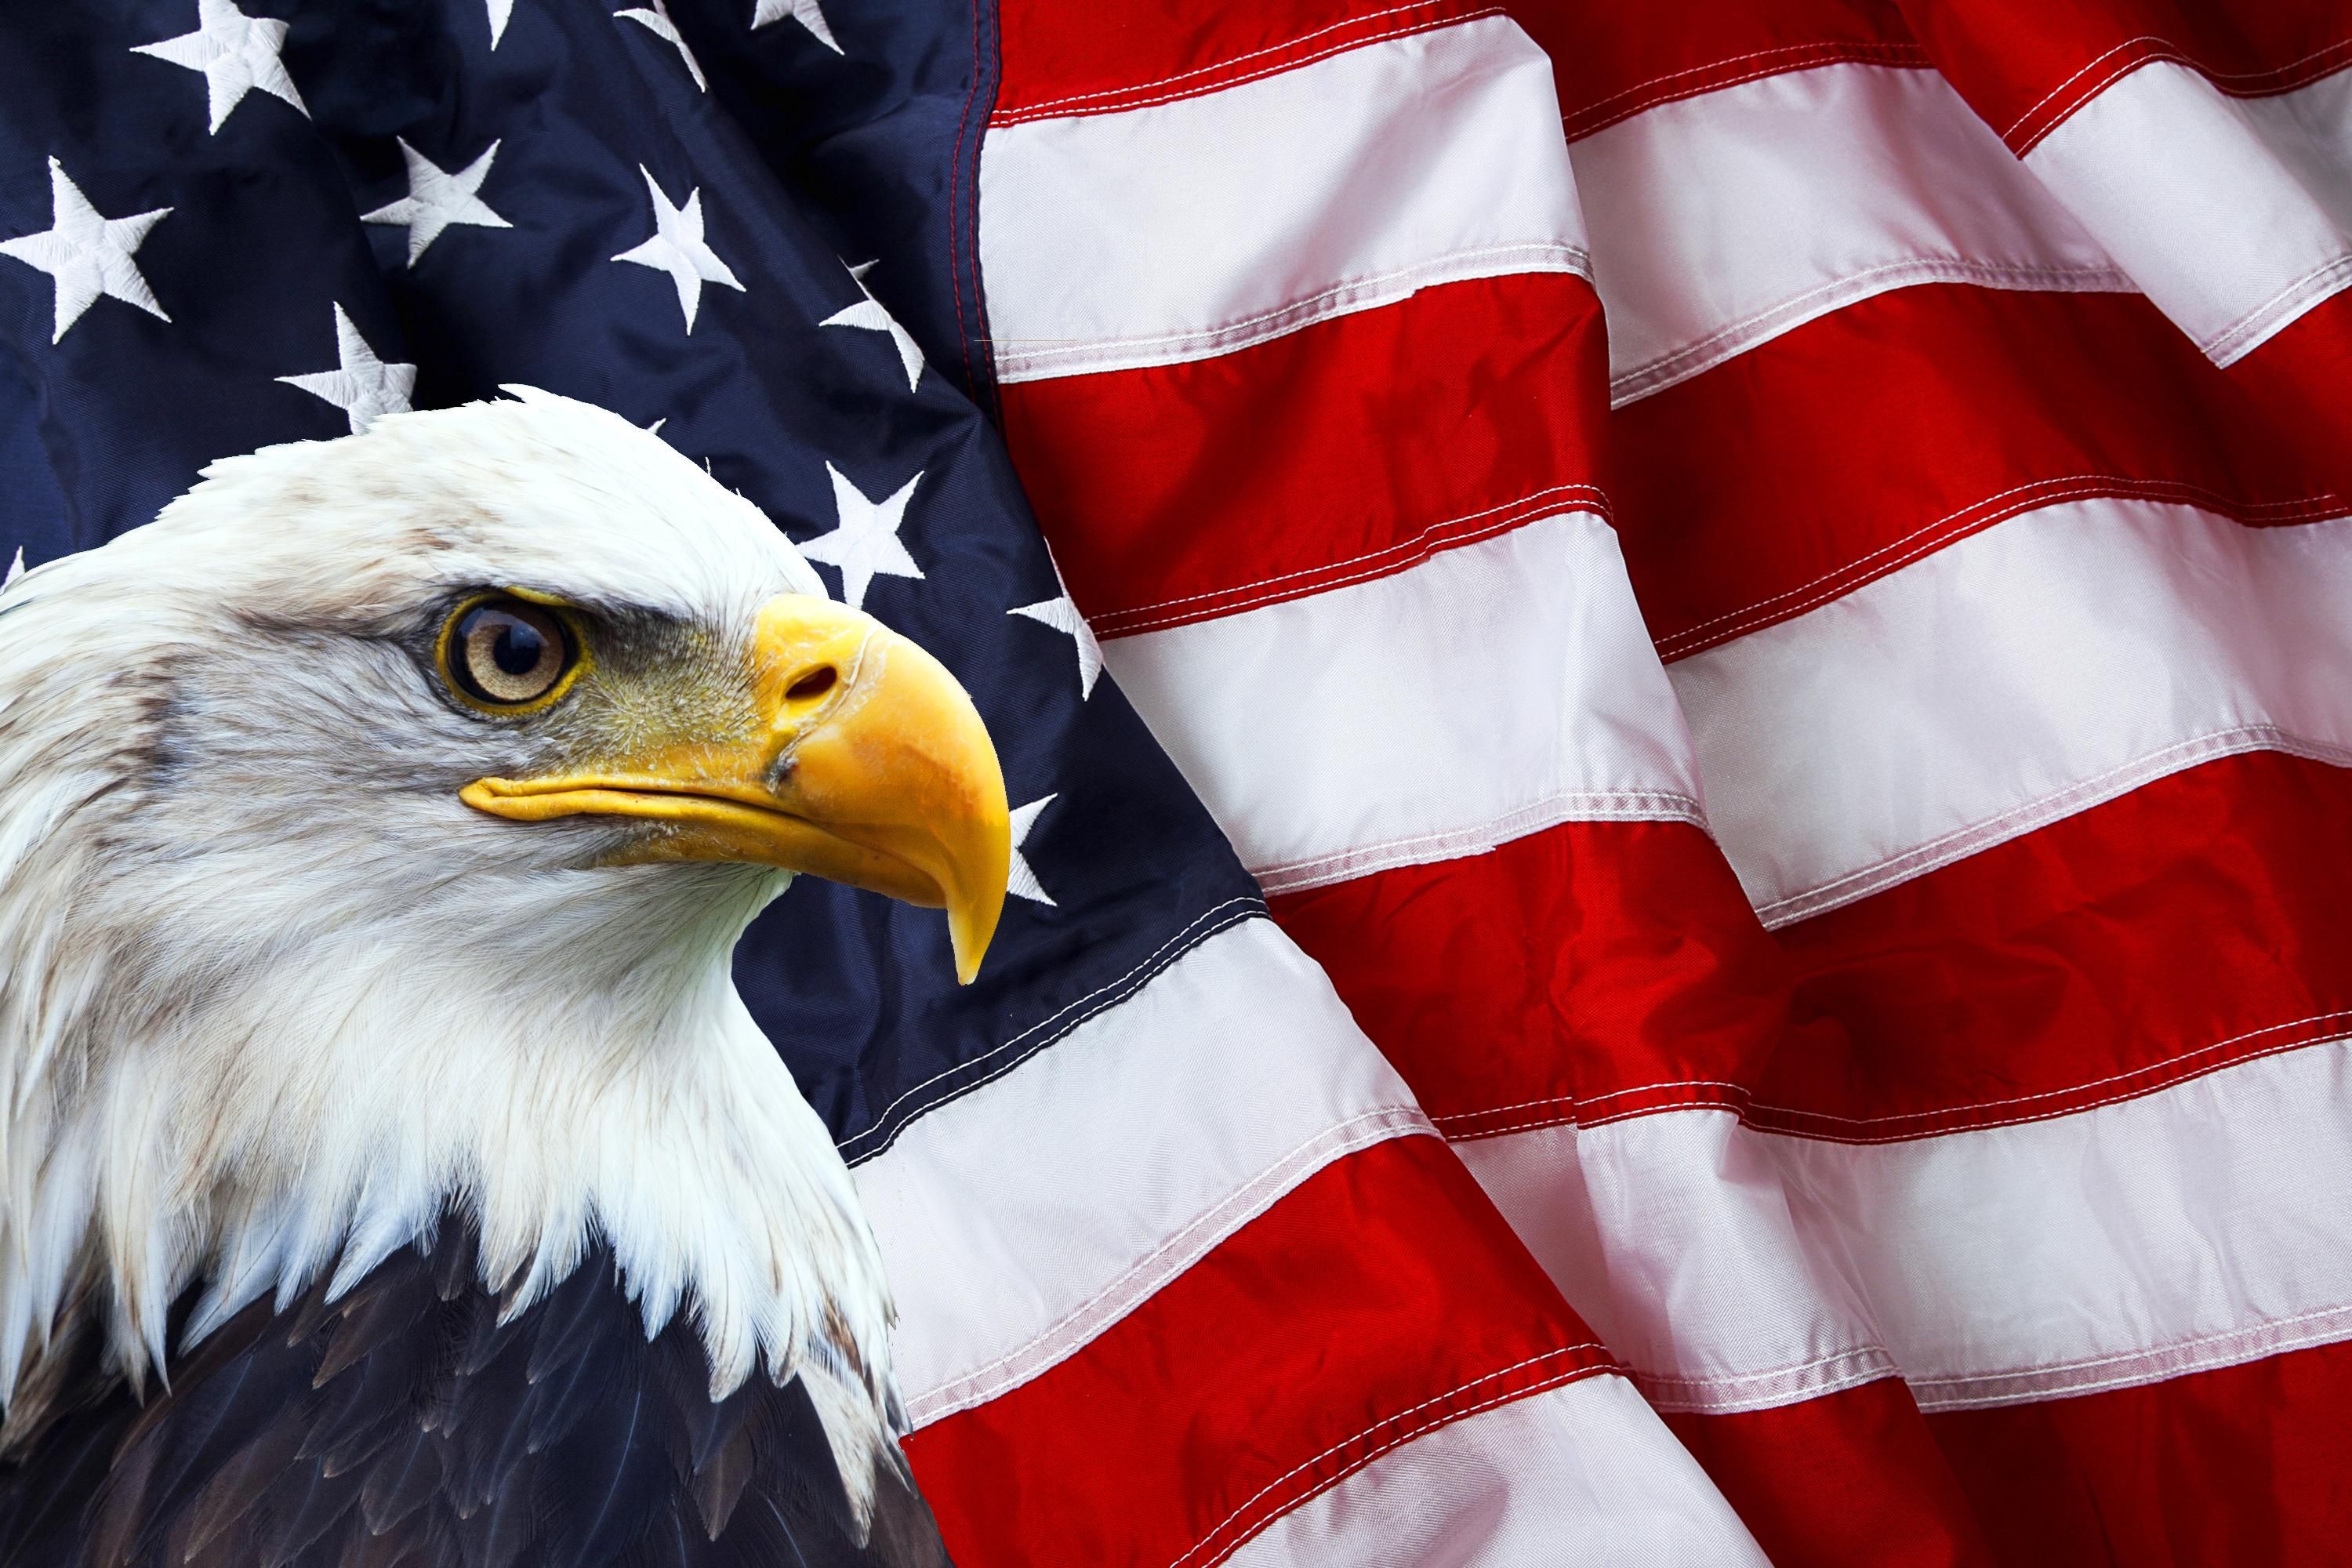 United States Symbols: Free Social Studies Lesson Plan for 3rd, 4th, and 5th Grade. Usa flag wallpaper, American bald eagle, American flag picture